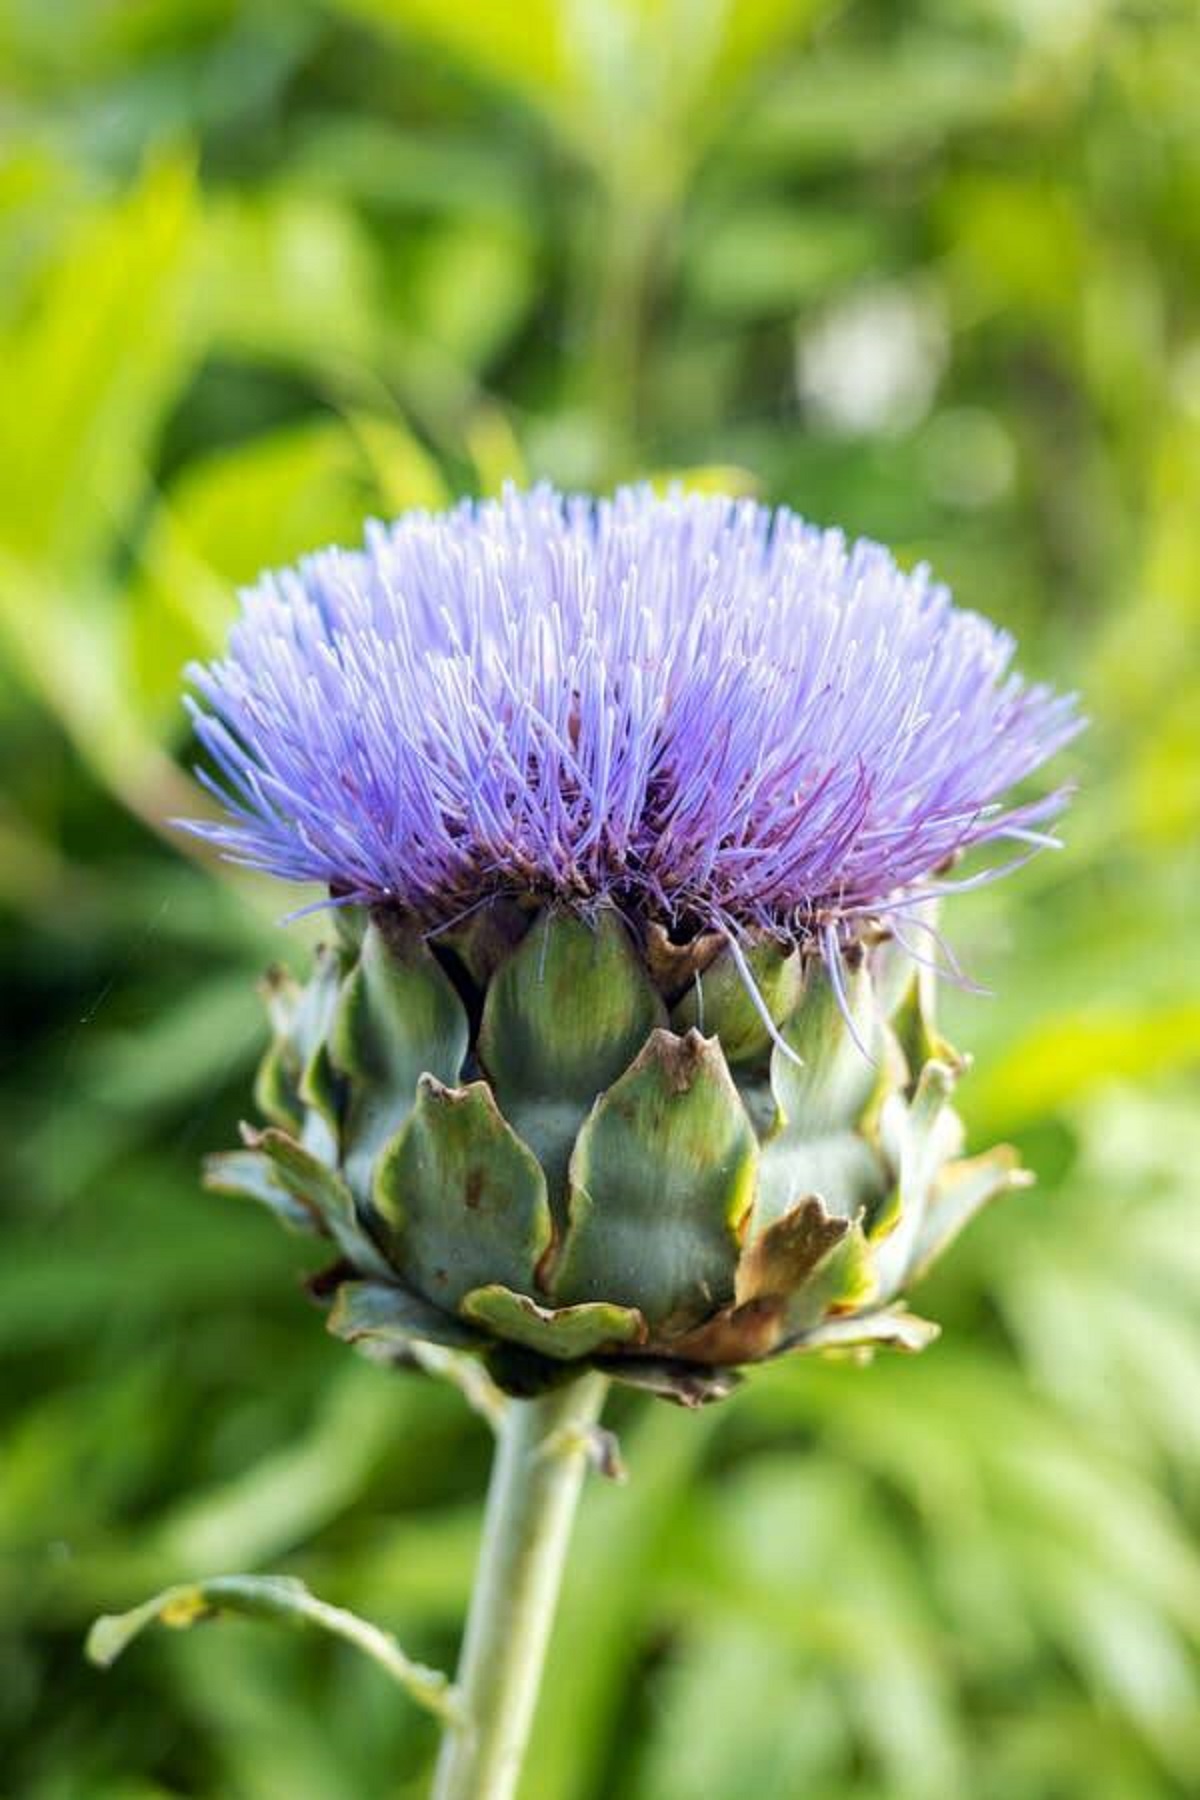 Artichokes can be beautiful if you let them bloom: